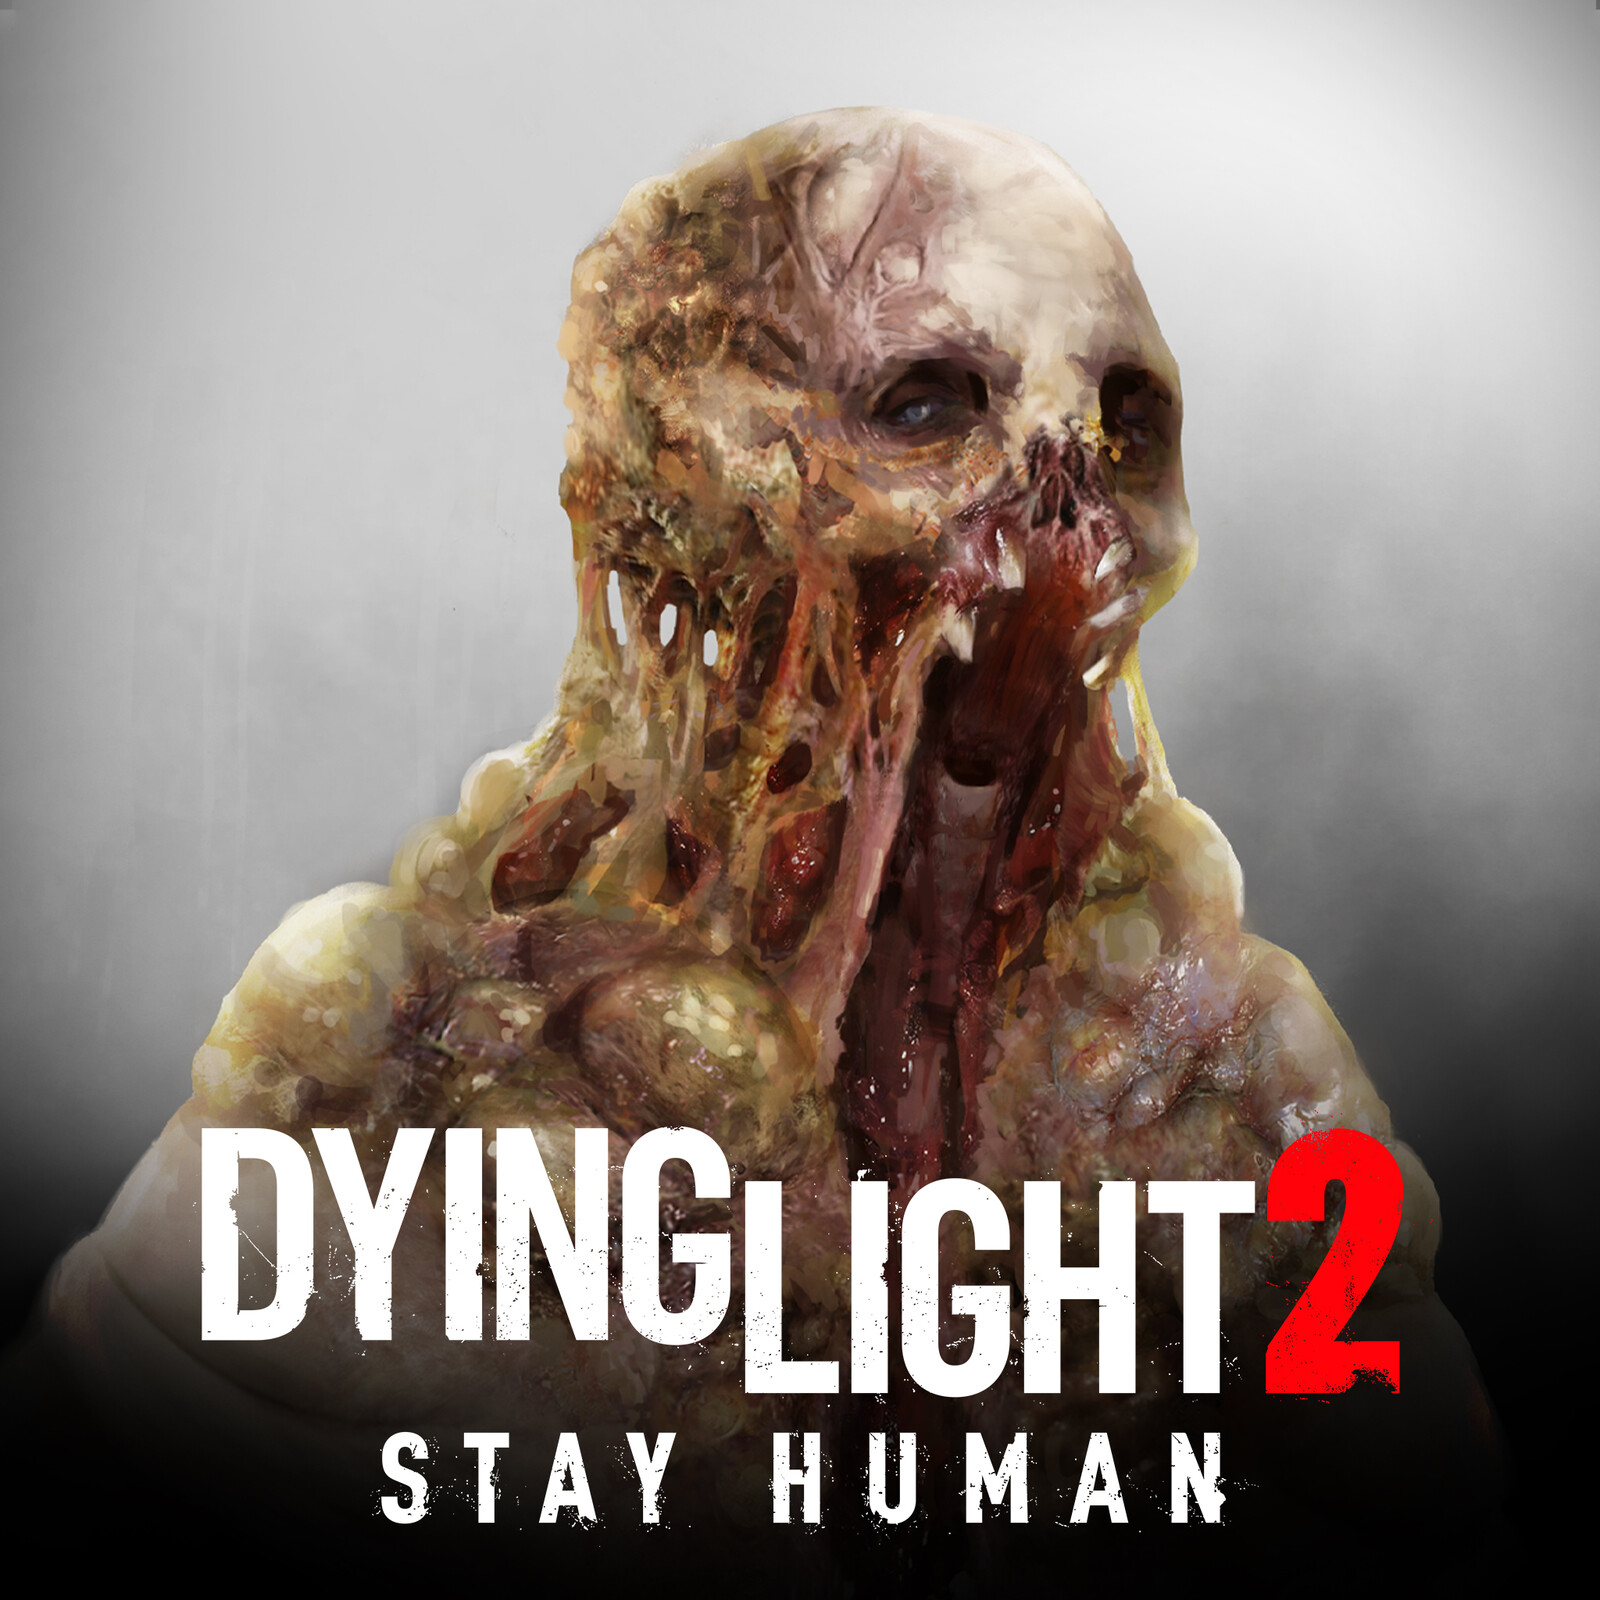 Dying Light 2 Stay Human - Spitter